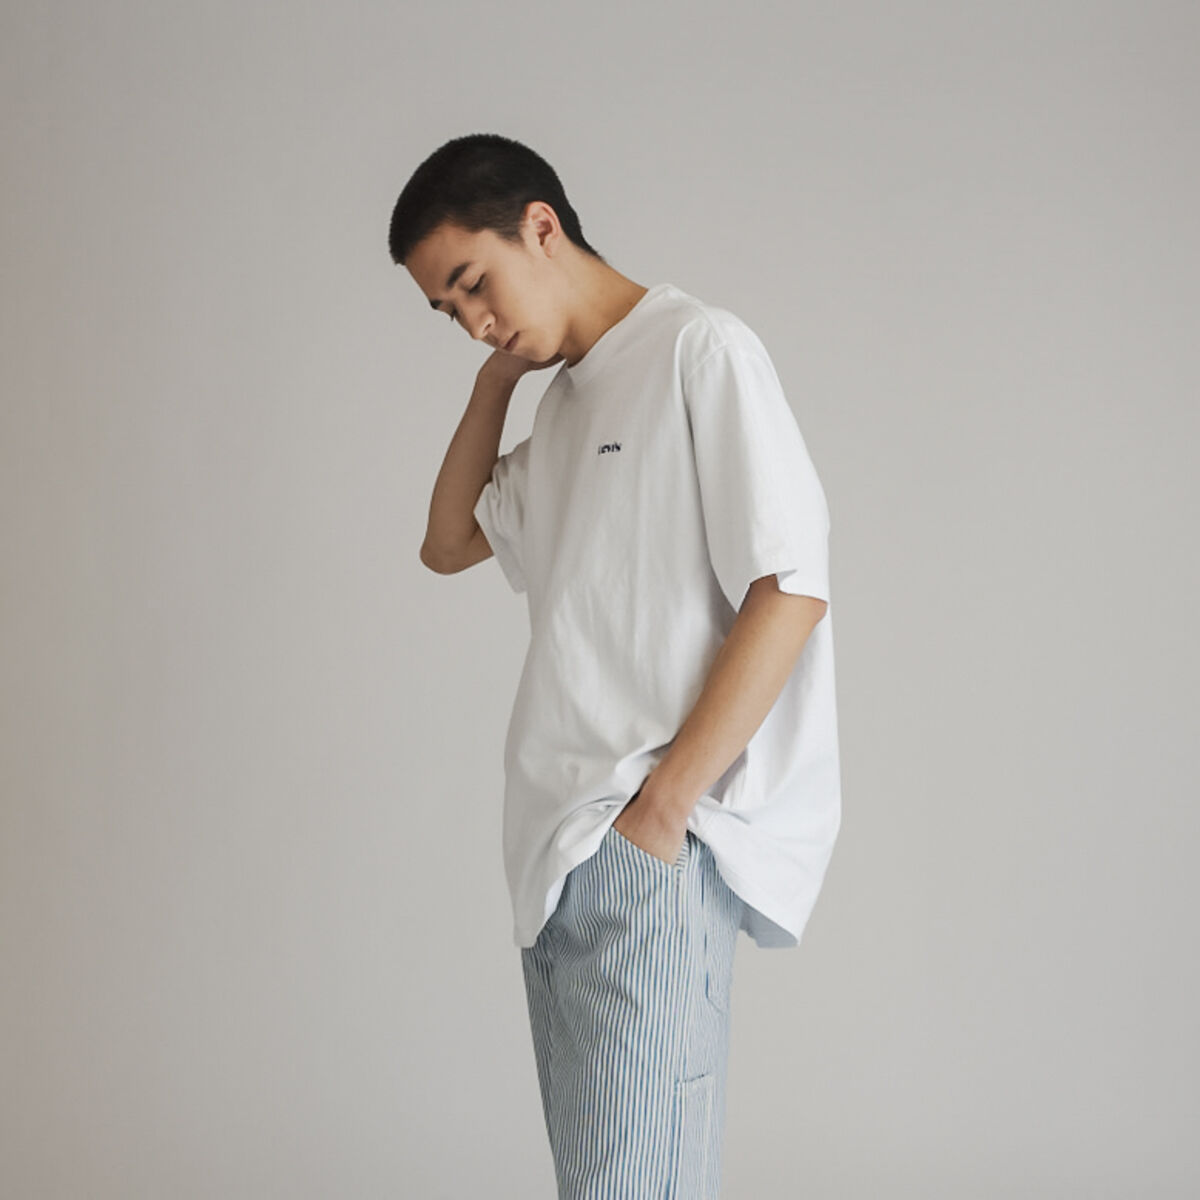 RELAXED FIT SS LOGO Tシャツ BRIGHT WHITE｜リーバイス® 公式通販